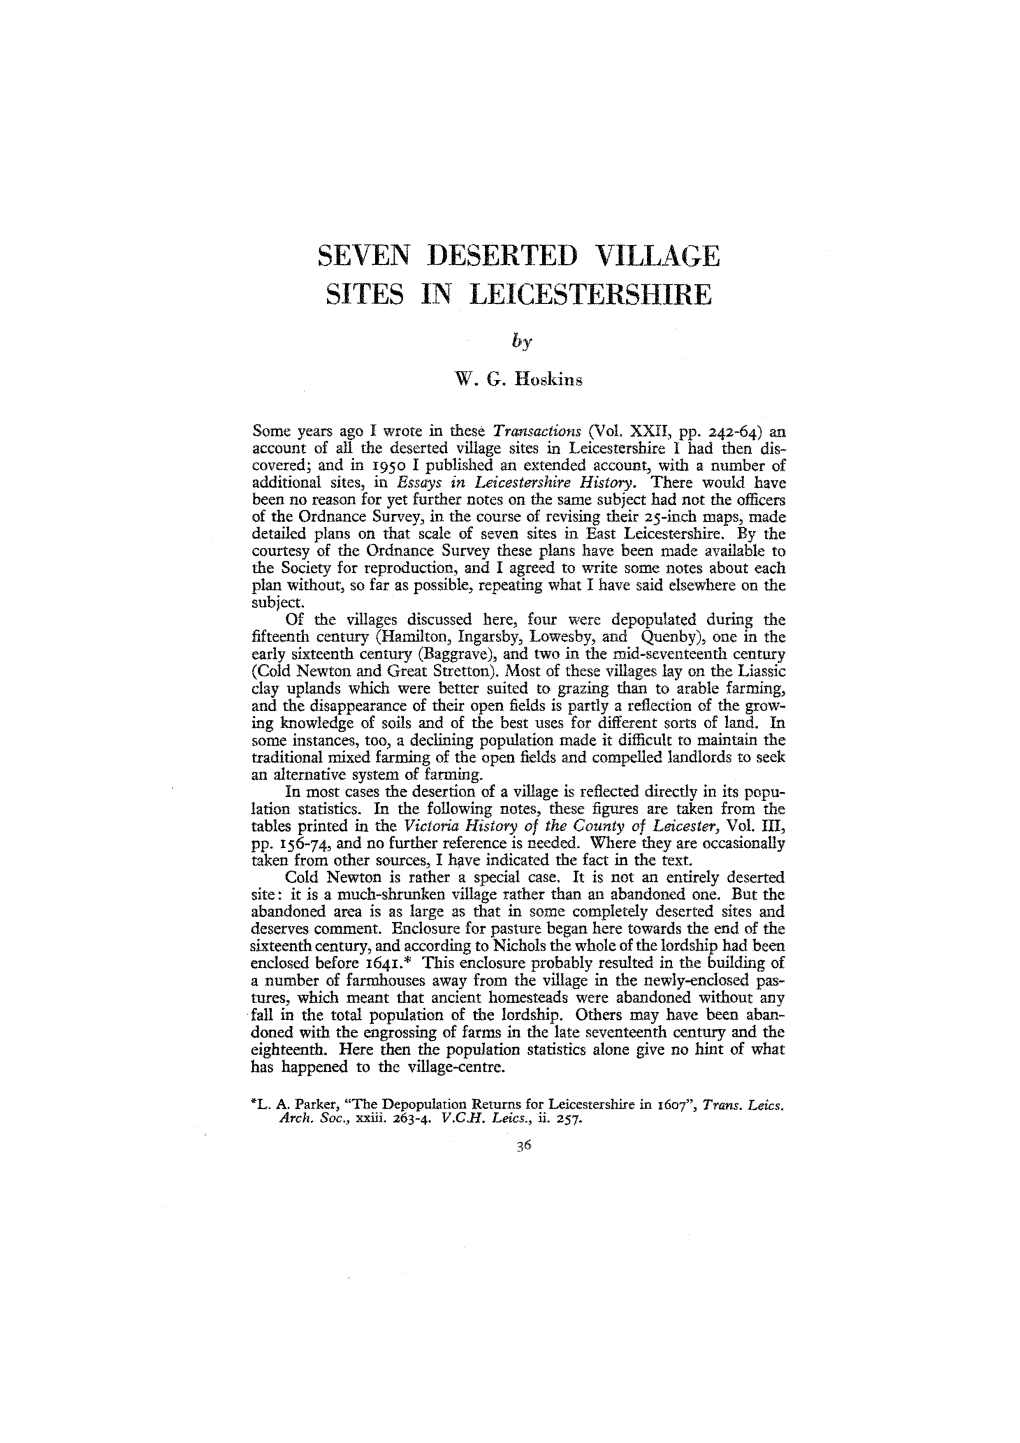 Seven Deserted Village Sites in Leicestershire Pp.36-51